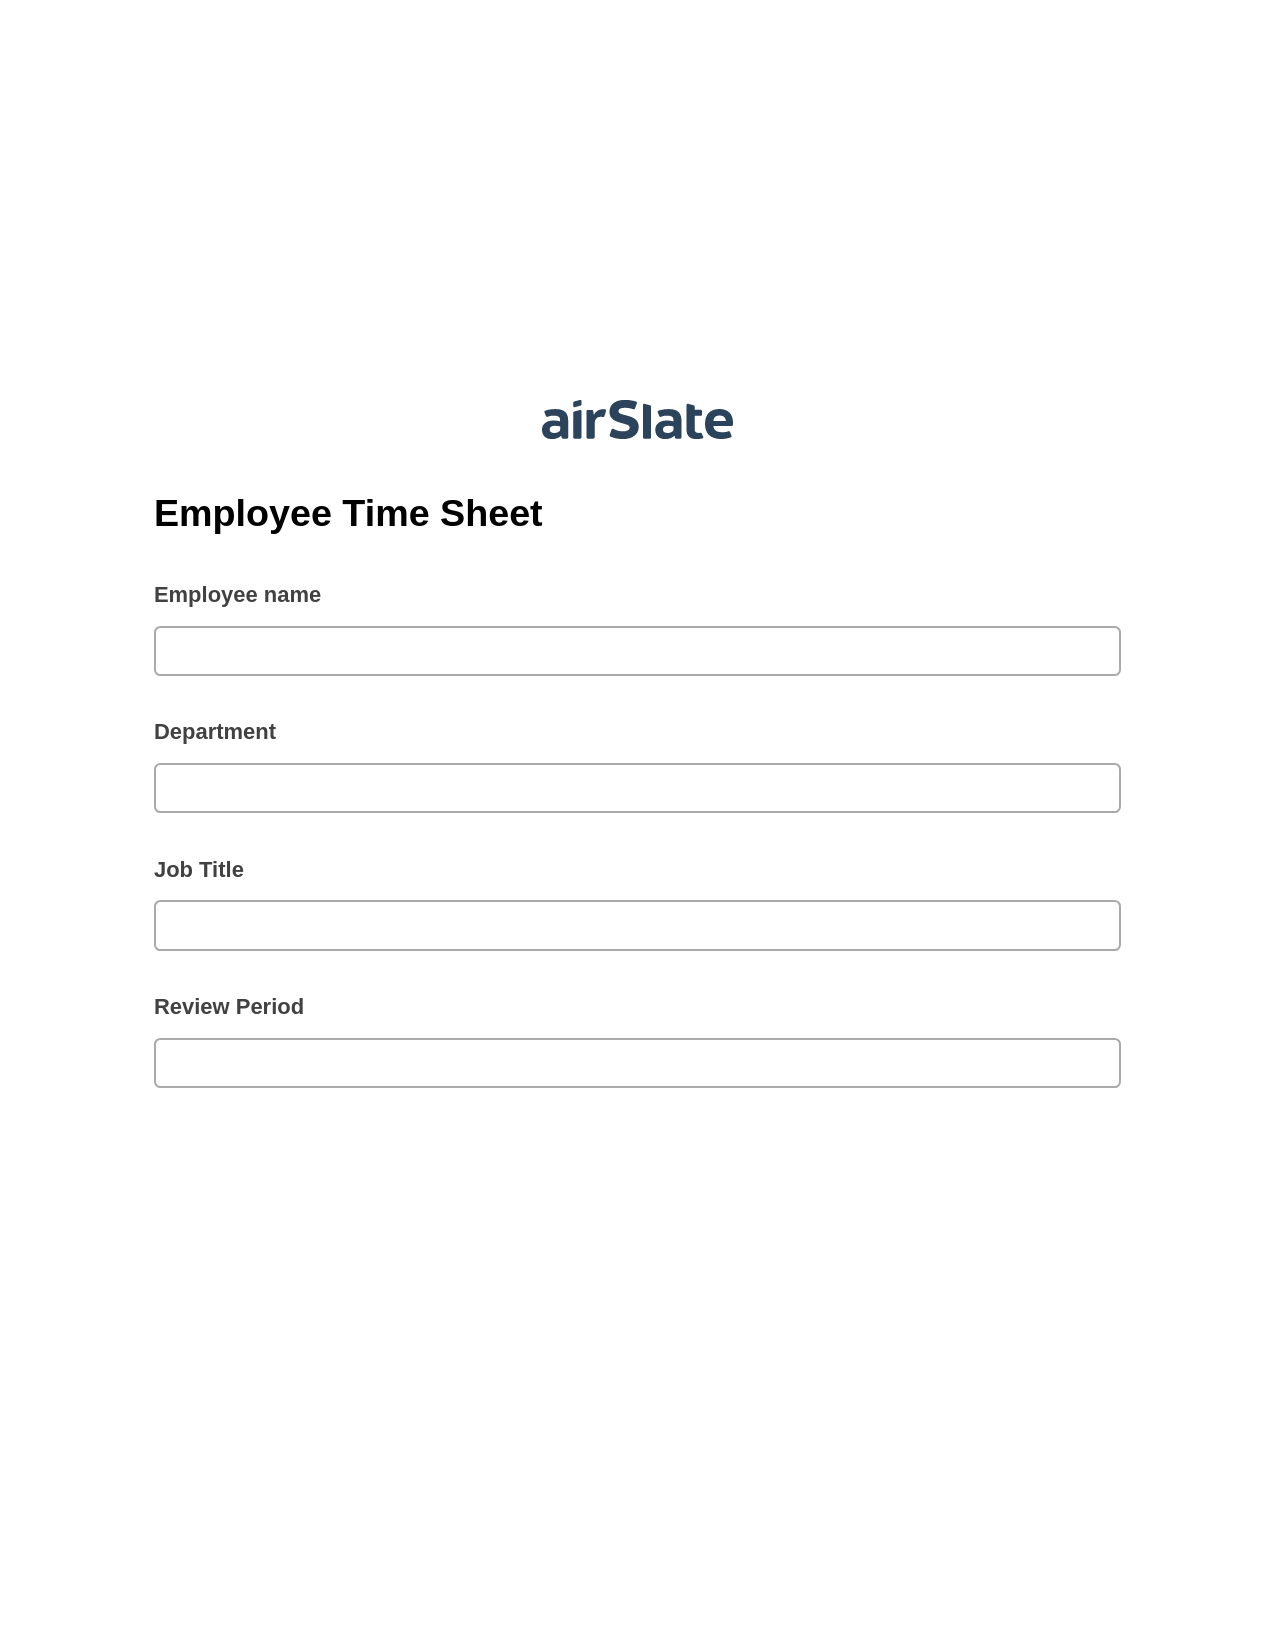 Employee Time Sheet Pre-fill from Excel Spreadsheet Bot, Update Audit Trail Bot, Email Notification Postfinish Bot